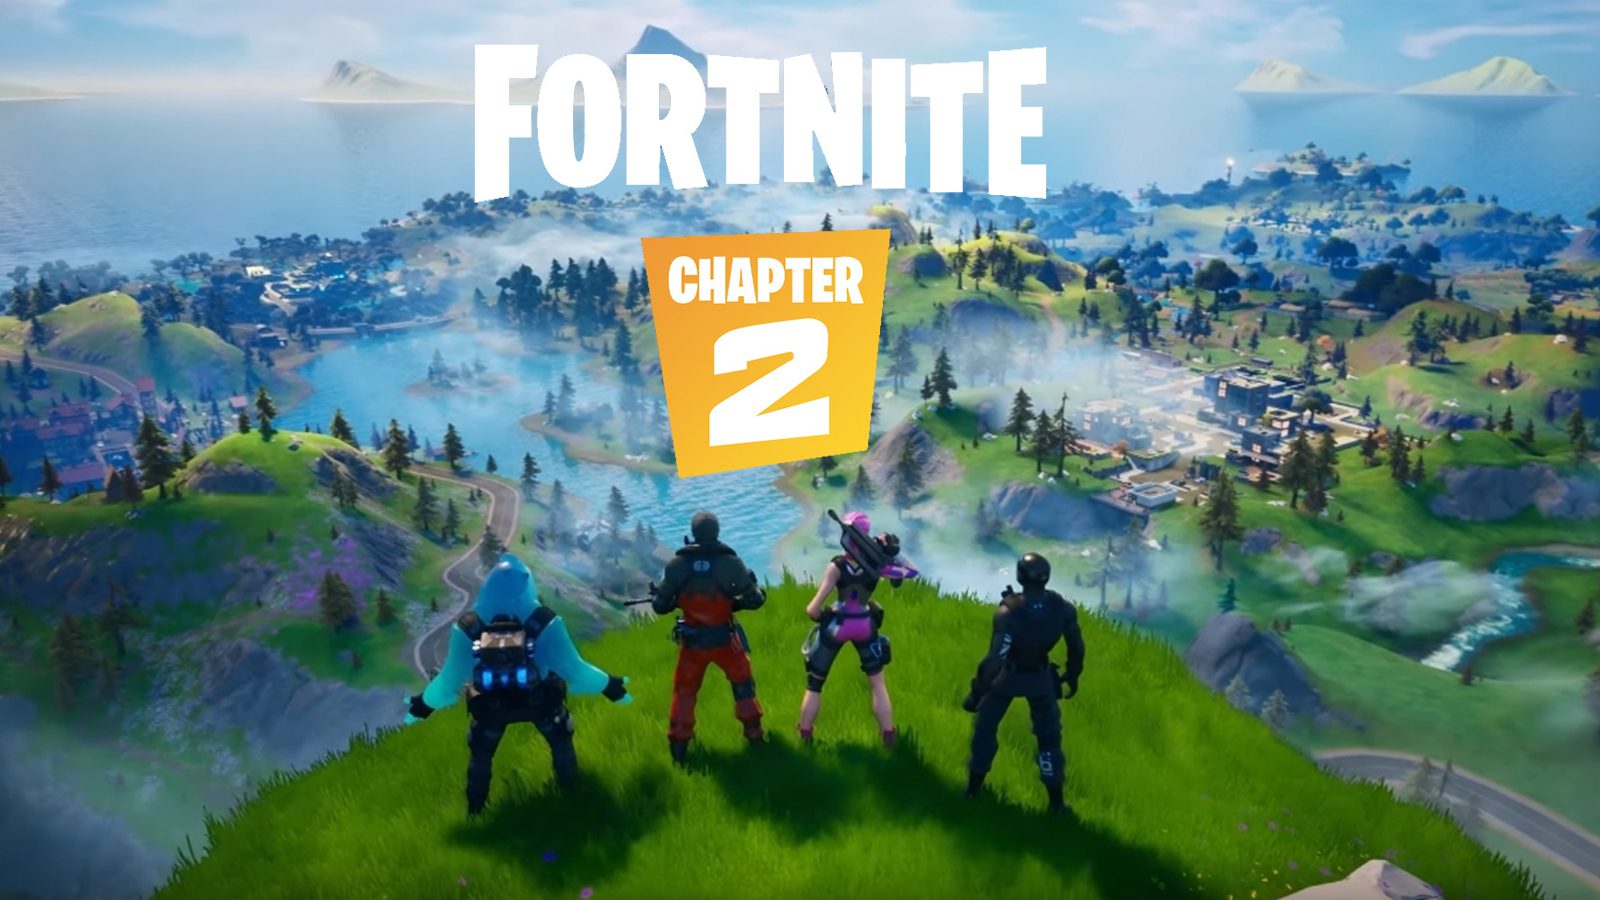 Upcoming Fortnite Chapter 2 Season 3 Map Apparently Leaked Mxdwn Games